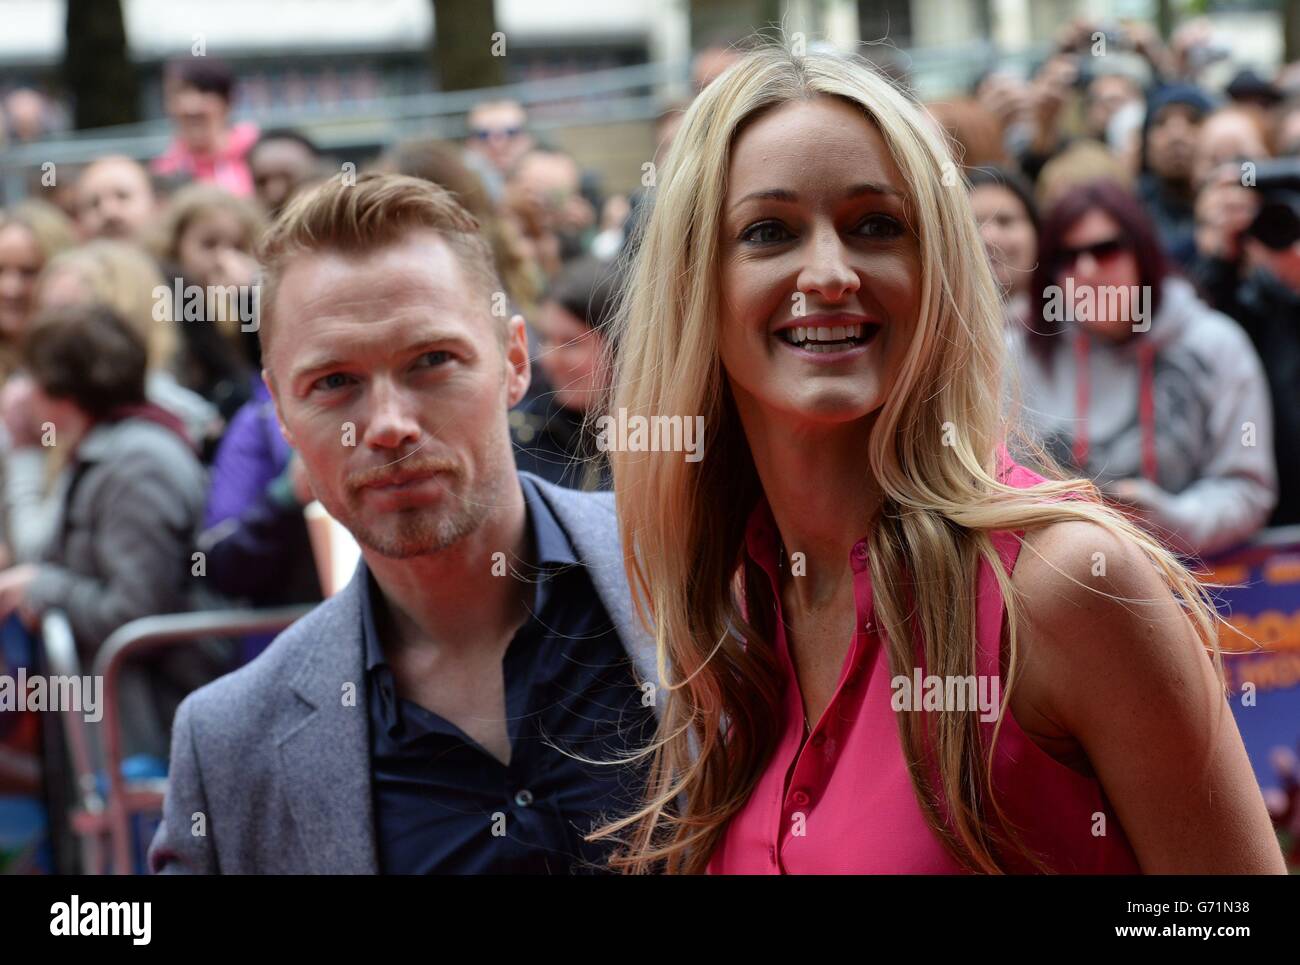 Ronan Keating, who is Postman Pat's singing voice, with girlfriend Storm Uechtritz arrives for the premiere of Postman Pat: The Movie at the Odeon, West End, London. Stock Photo